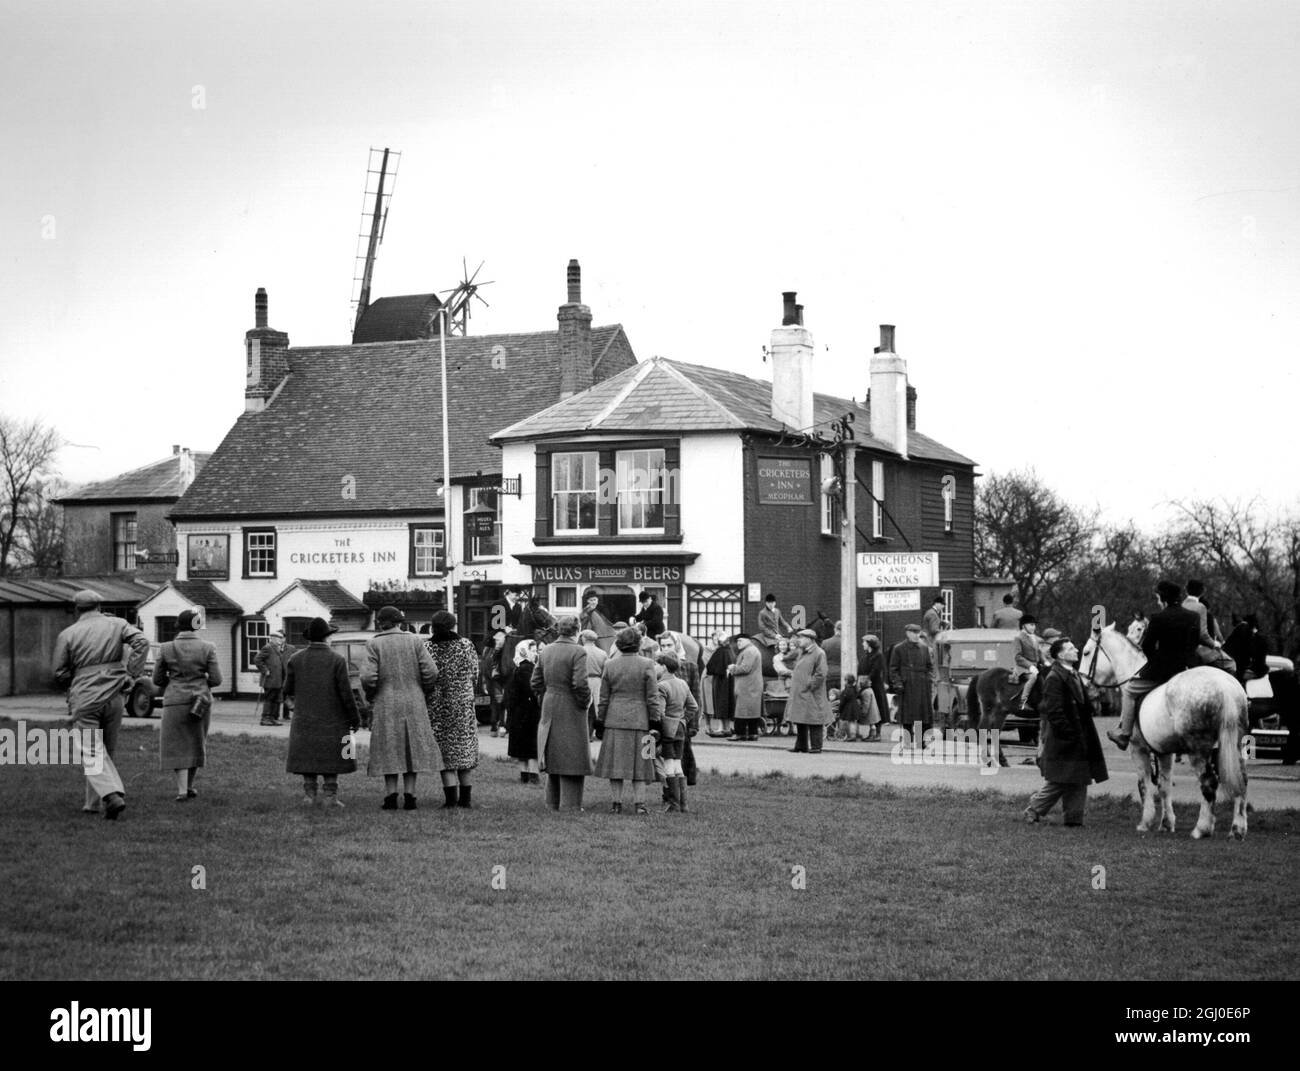 They met on the cricket green outside the Cricketers Inn Meopham, Kent - but horses weren't allowed on the green itself. The meet was that of the West Kent Hunt (and Pony Club). The derelict windmill behind the inn is a landmark. 19th January 1954. Stock Photo